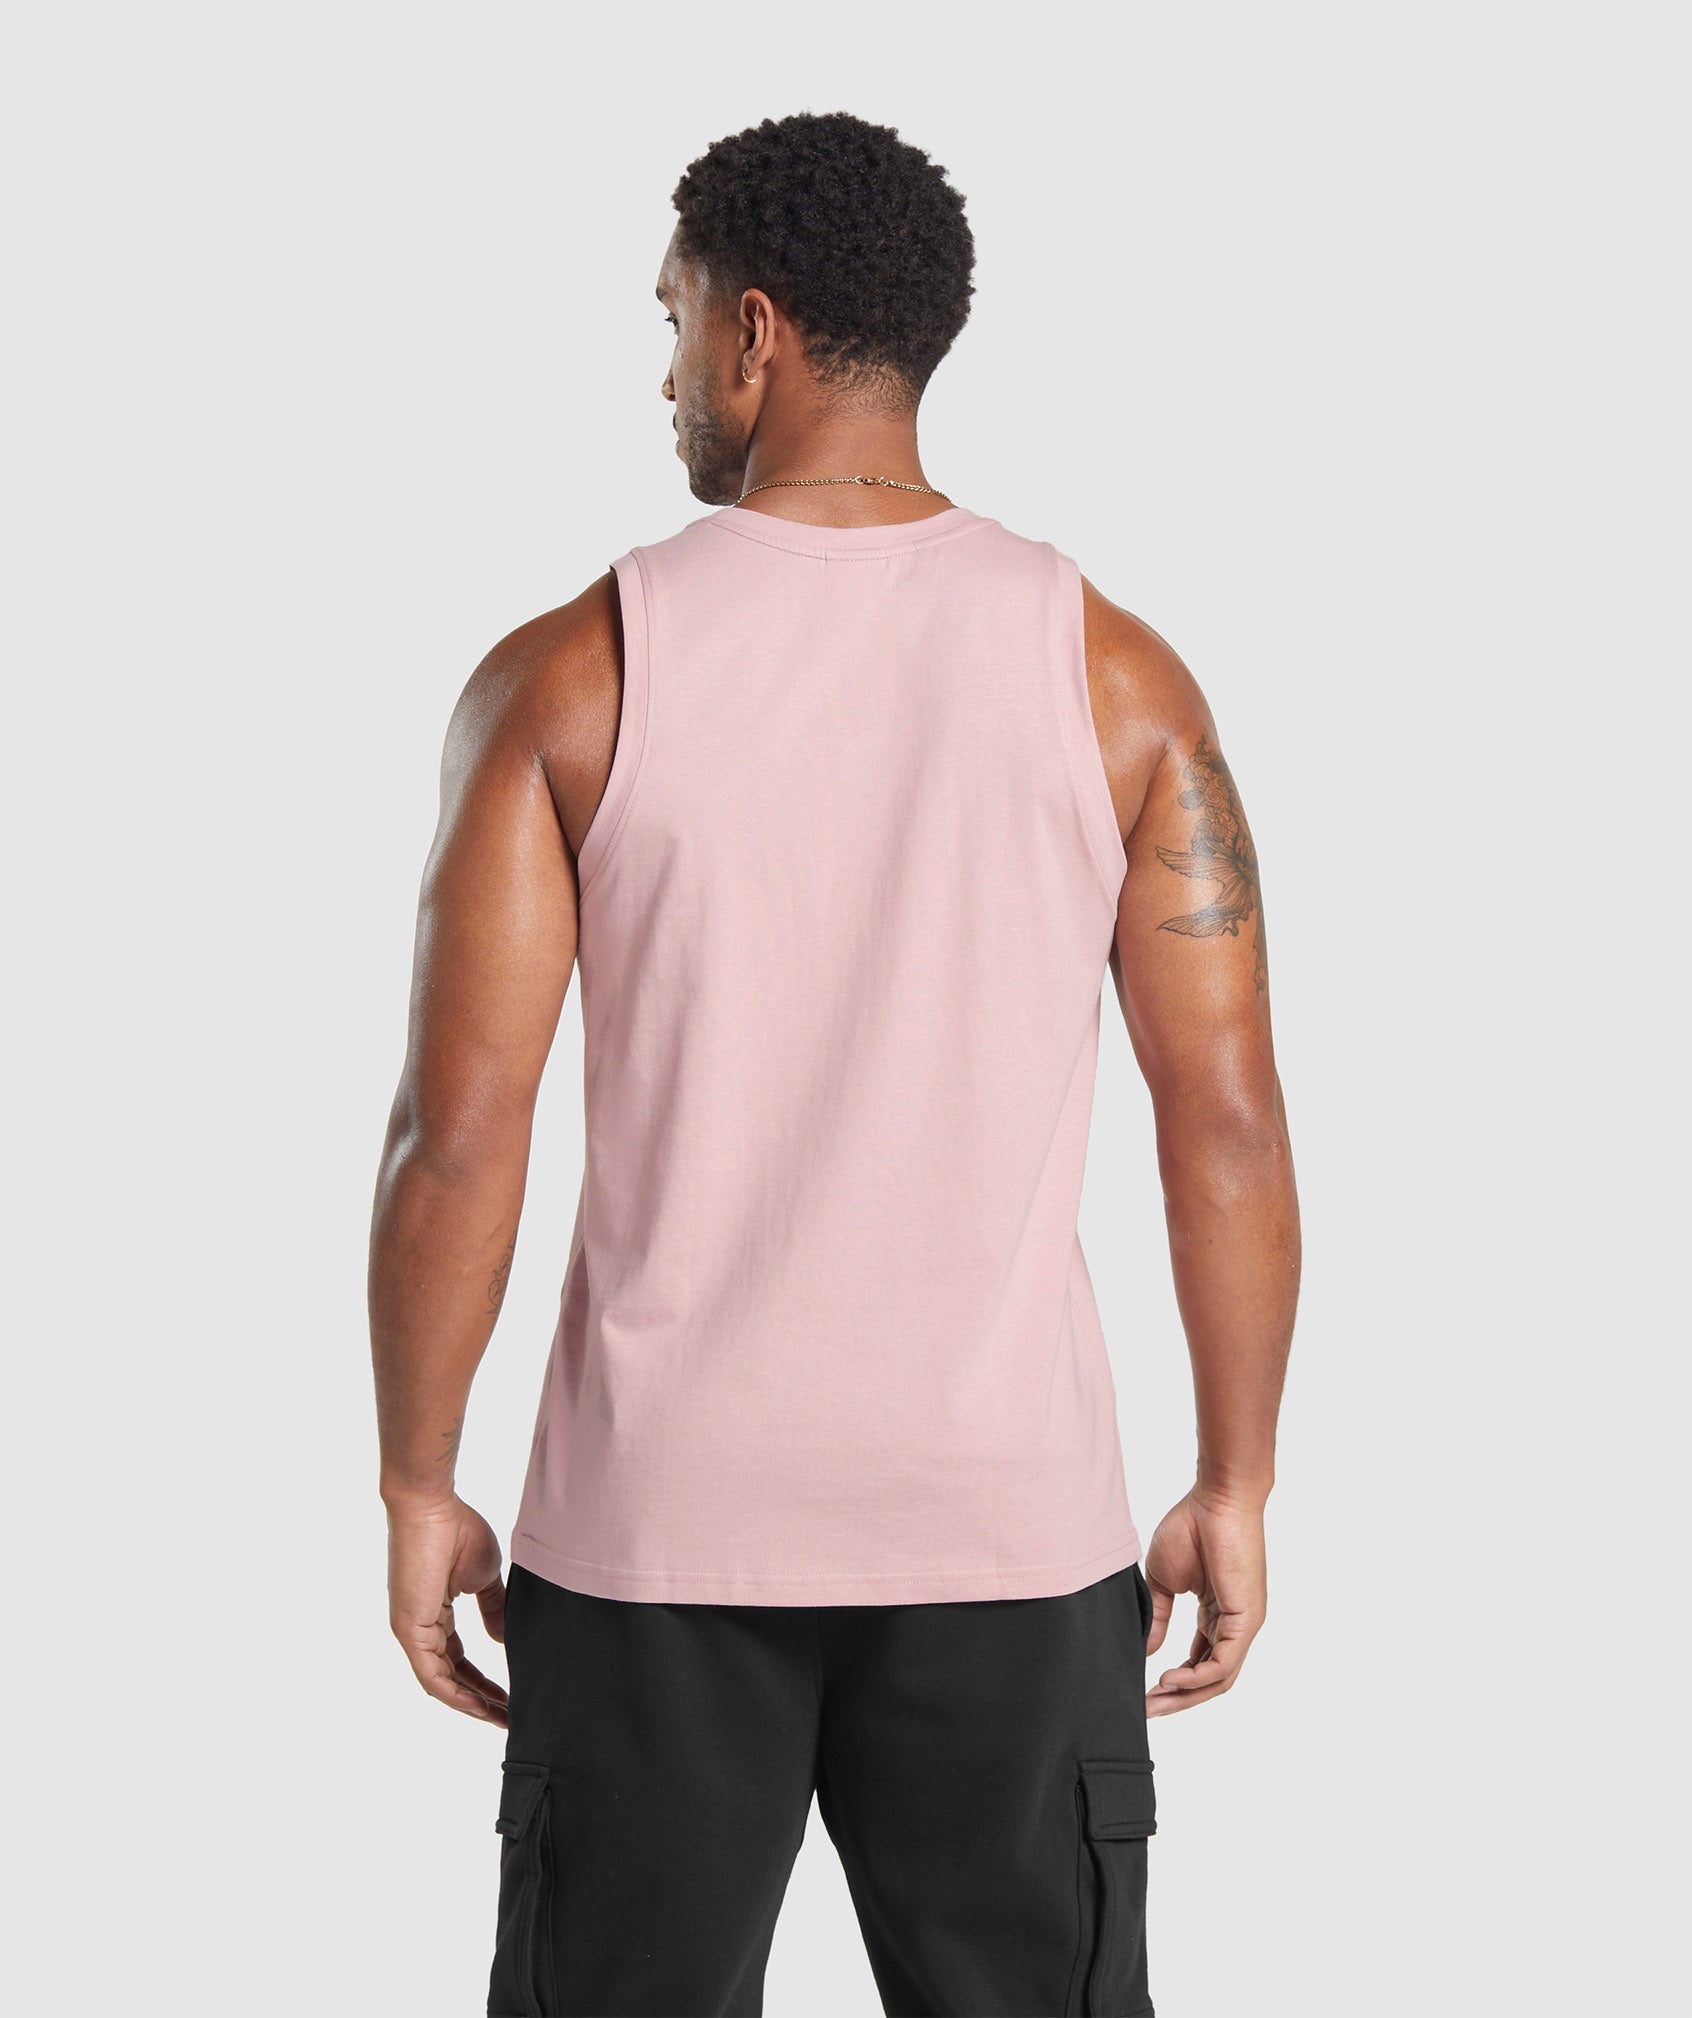 Crest Tank in Light Pink - view 2